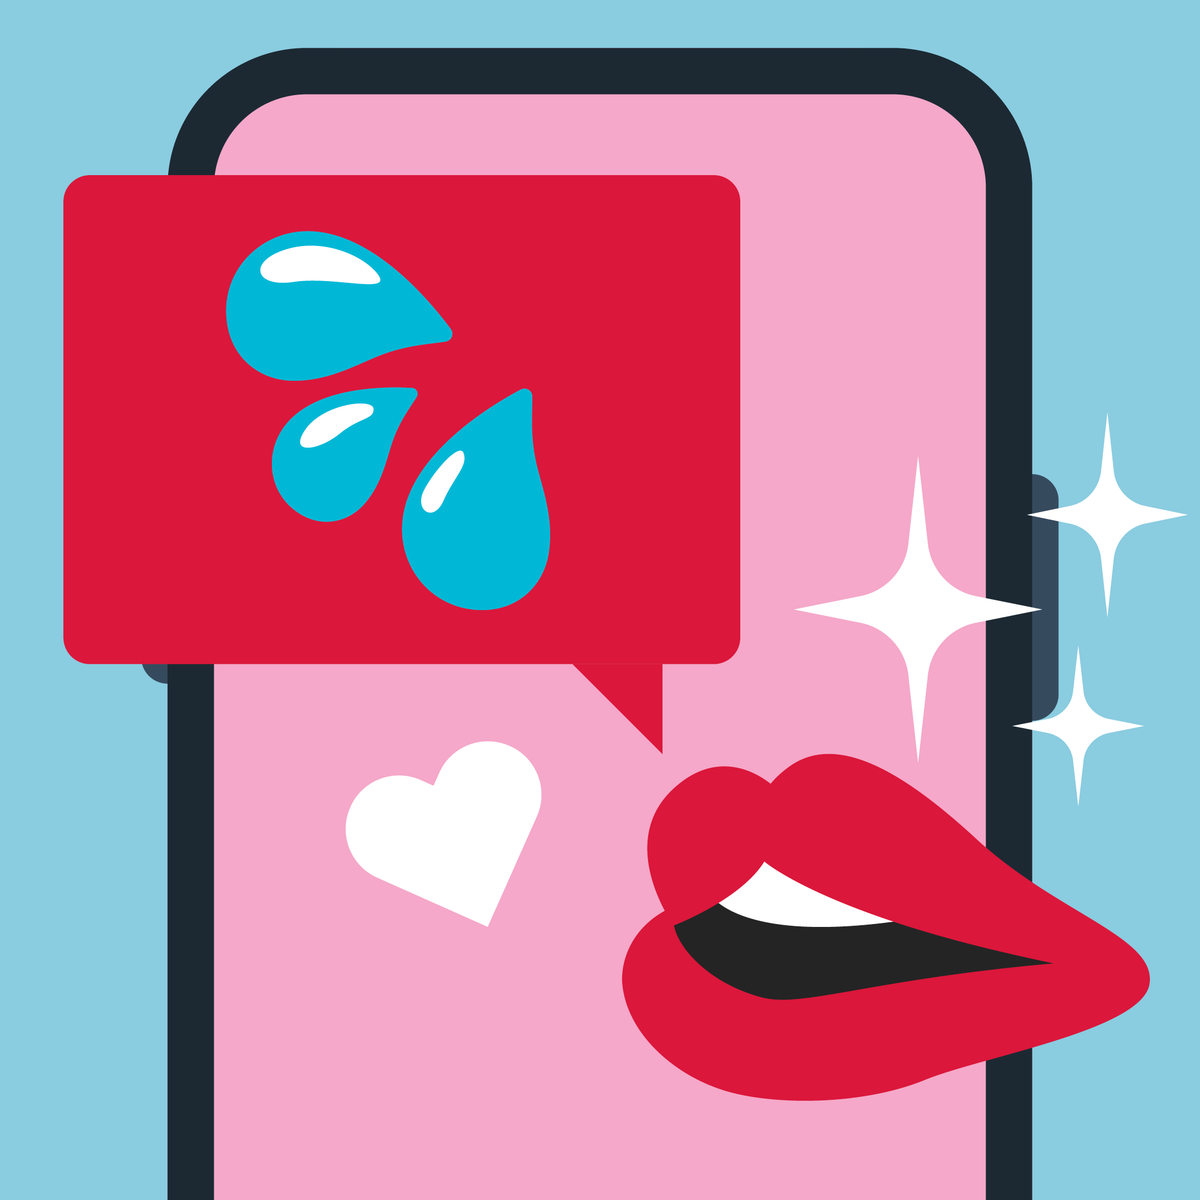 How To Sext - 60 Dirty Texting Tips And Examples From Experts